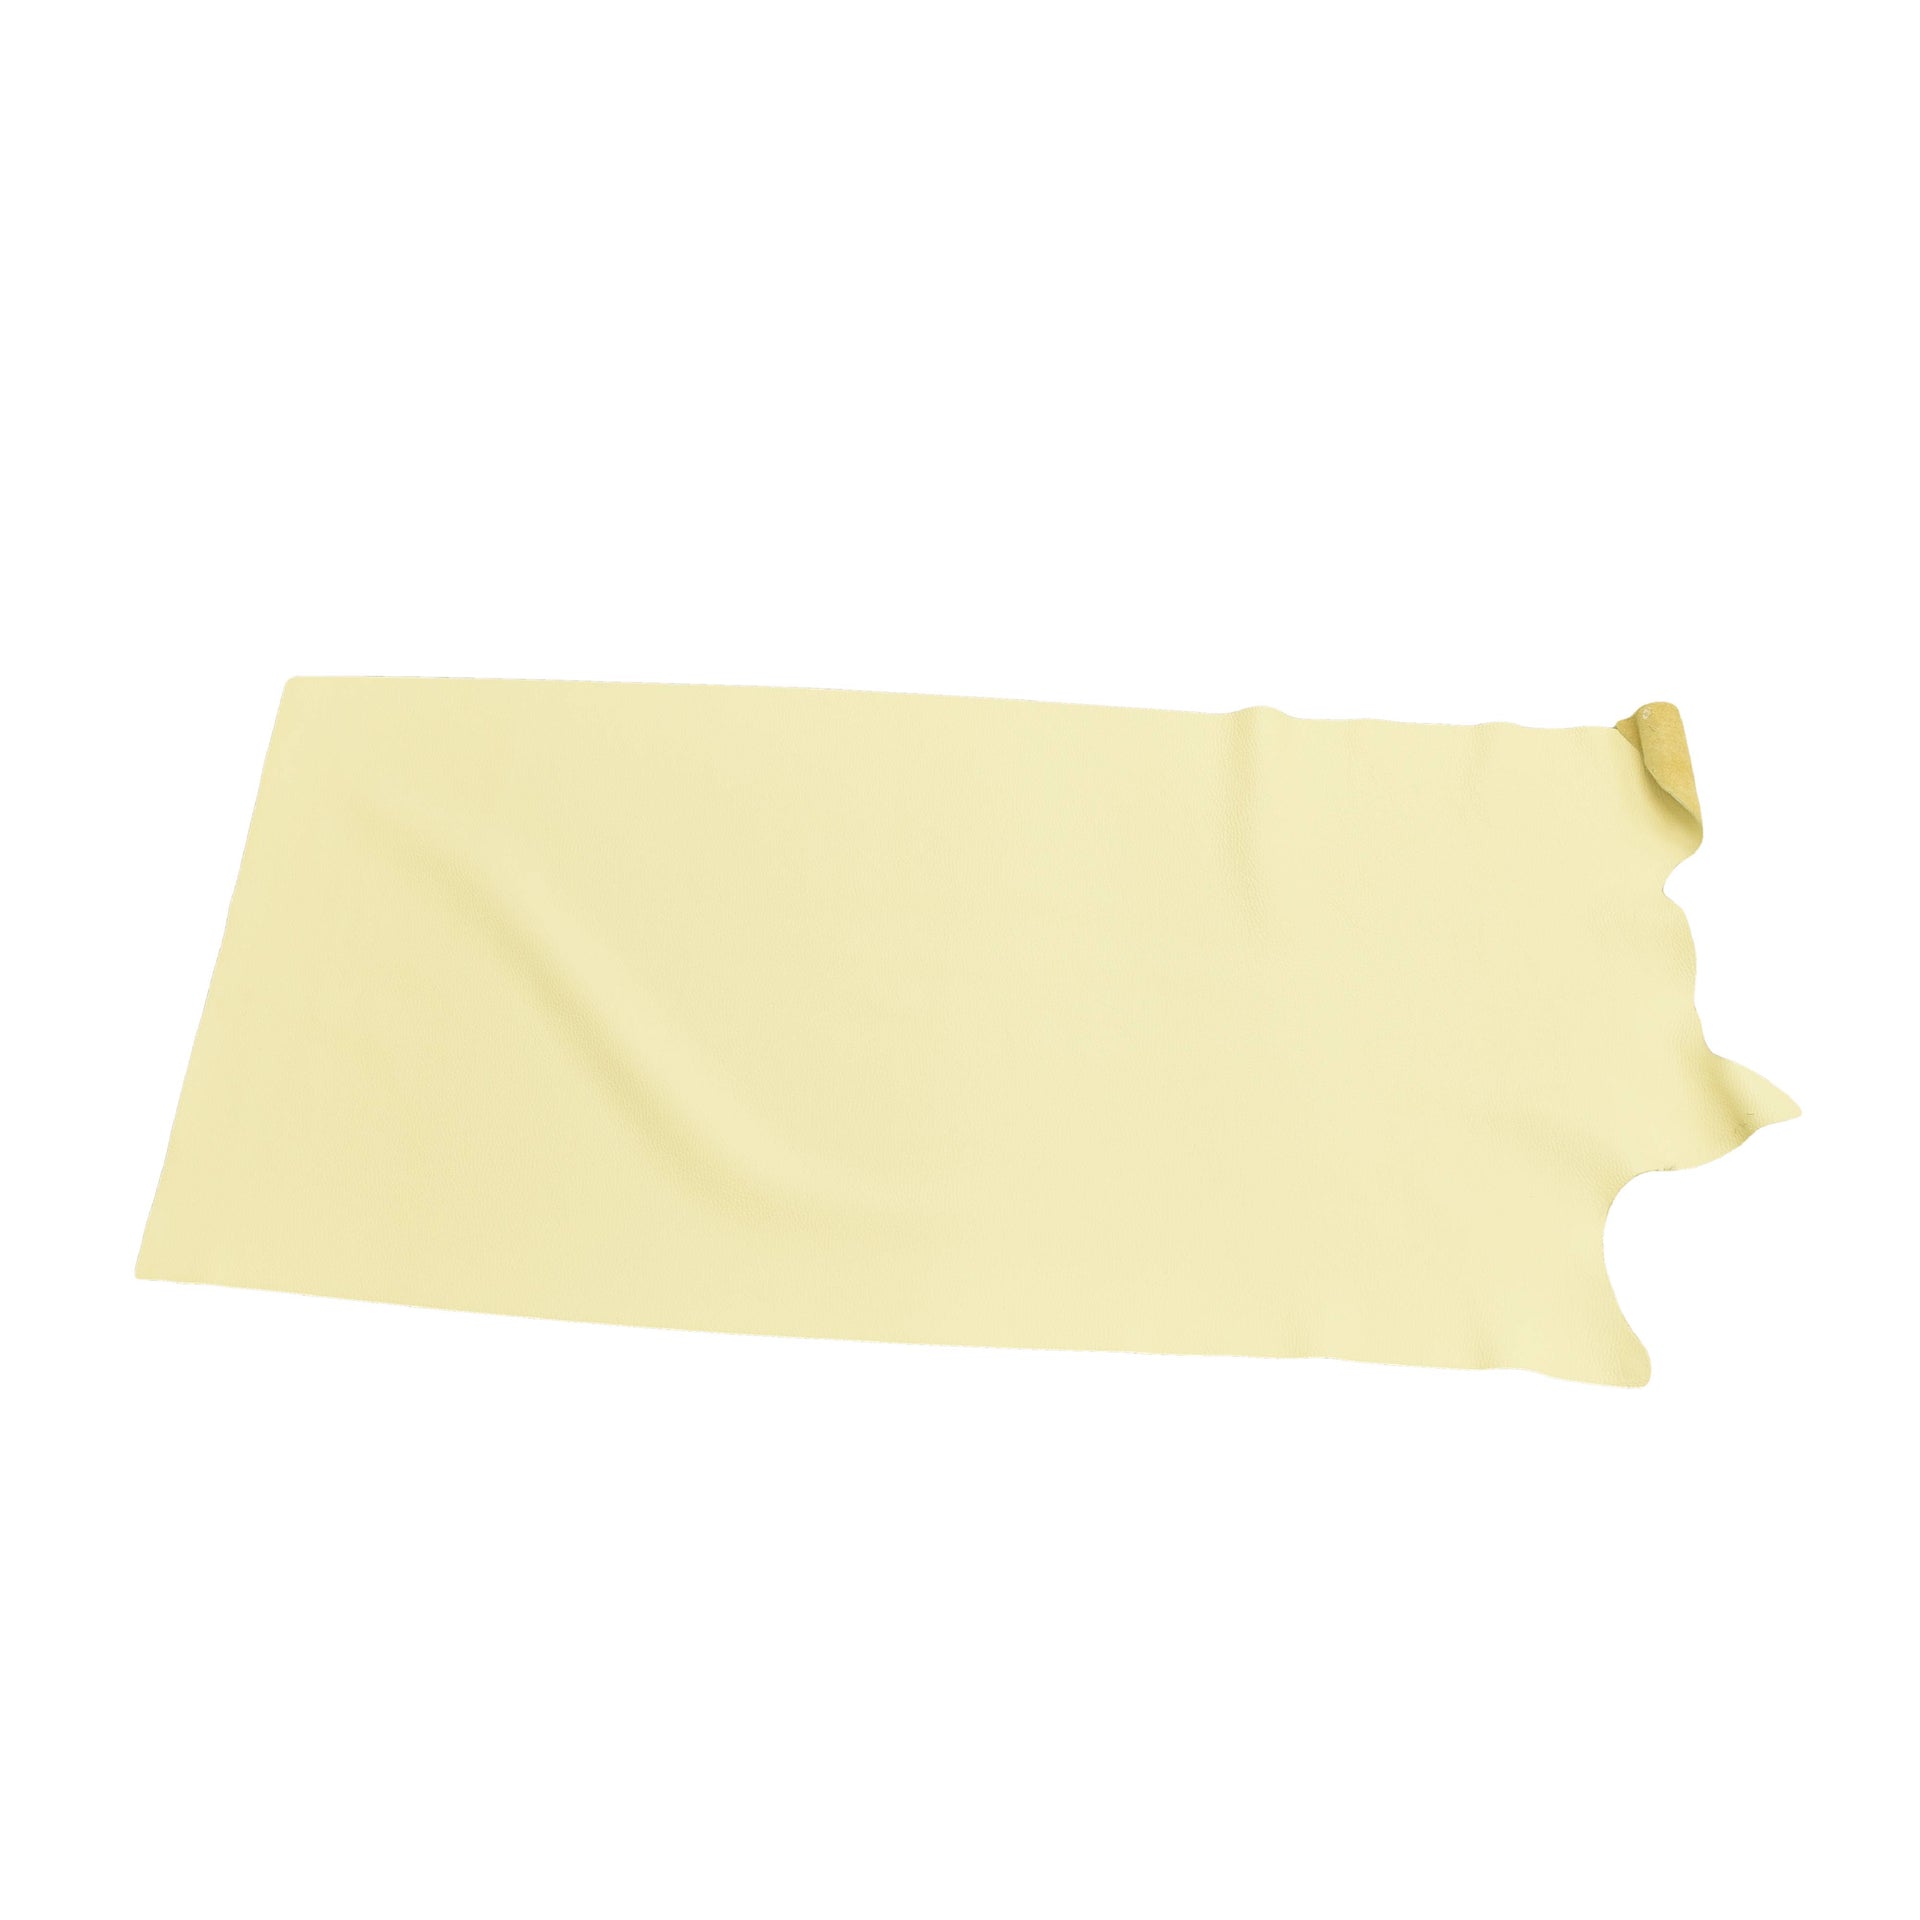 Montana Mellow Yellow Tried n True 3-4 oz Leather Cow Hides, Middle Piece / 6.5-7.5 Square Foot | The Leather Guy